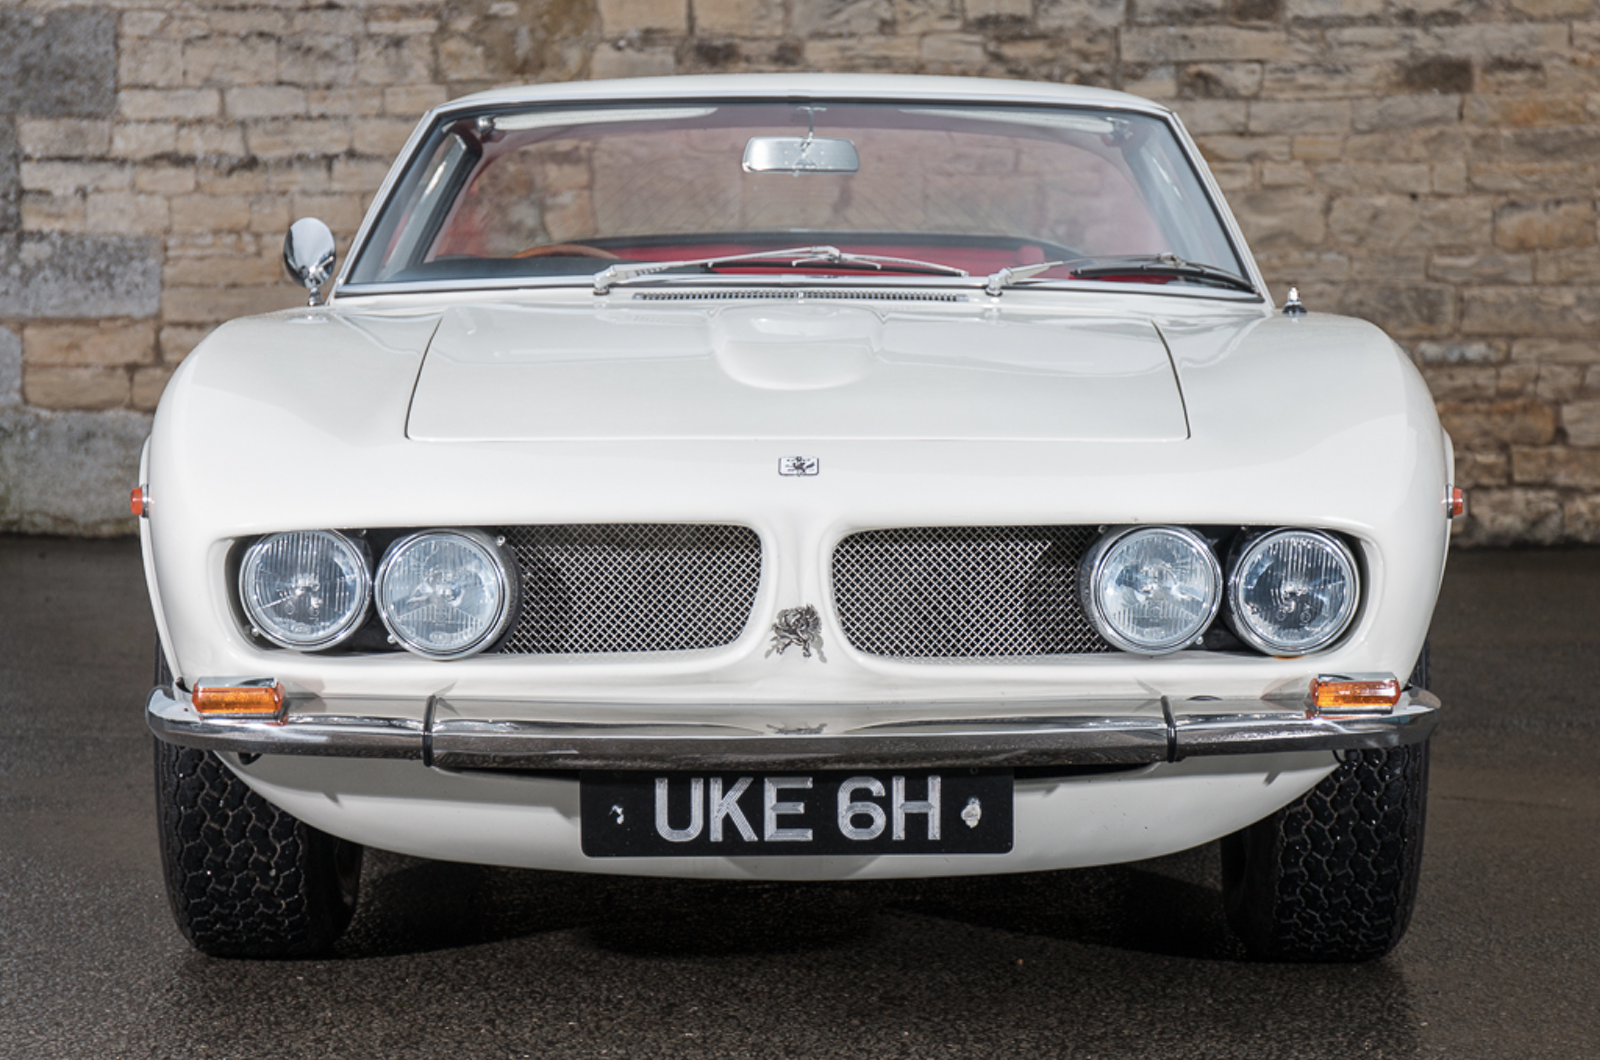 Daytona and Iso Grifo top dual Silverstone auctions